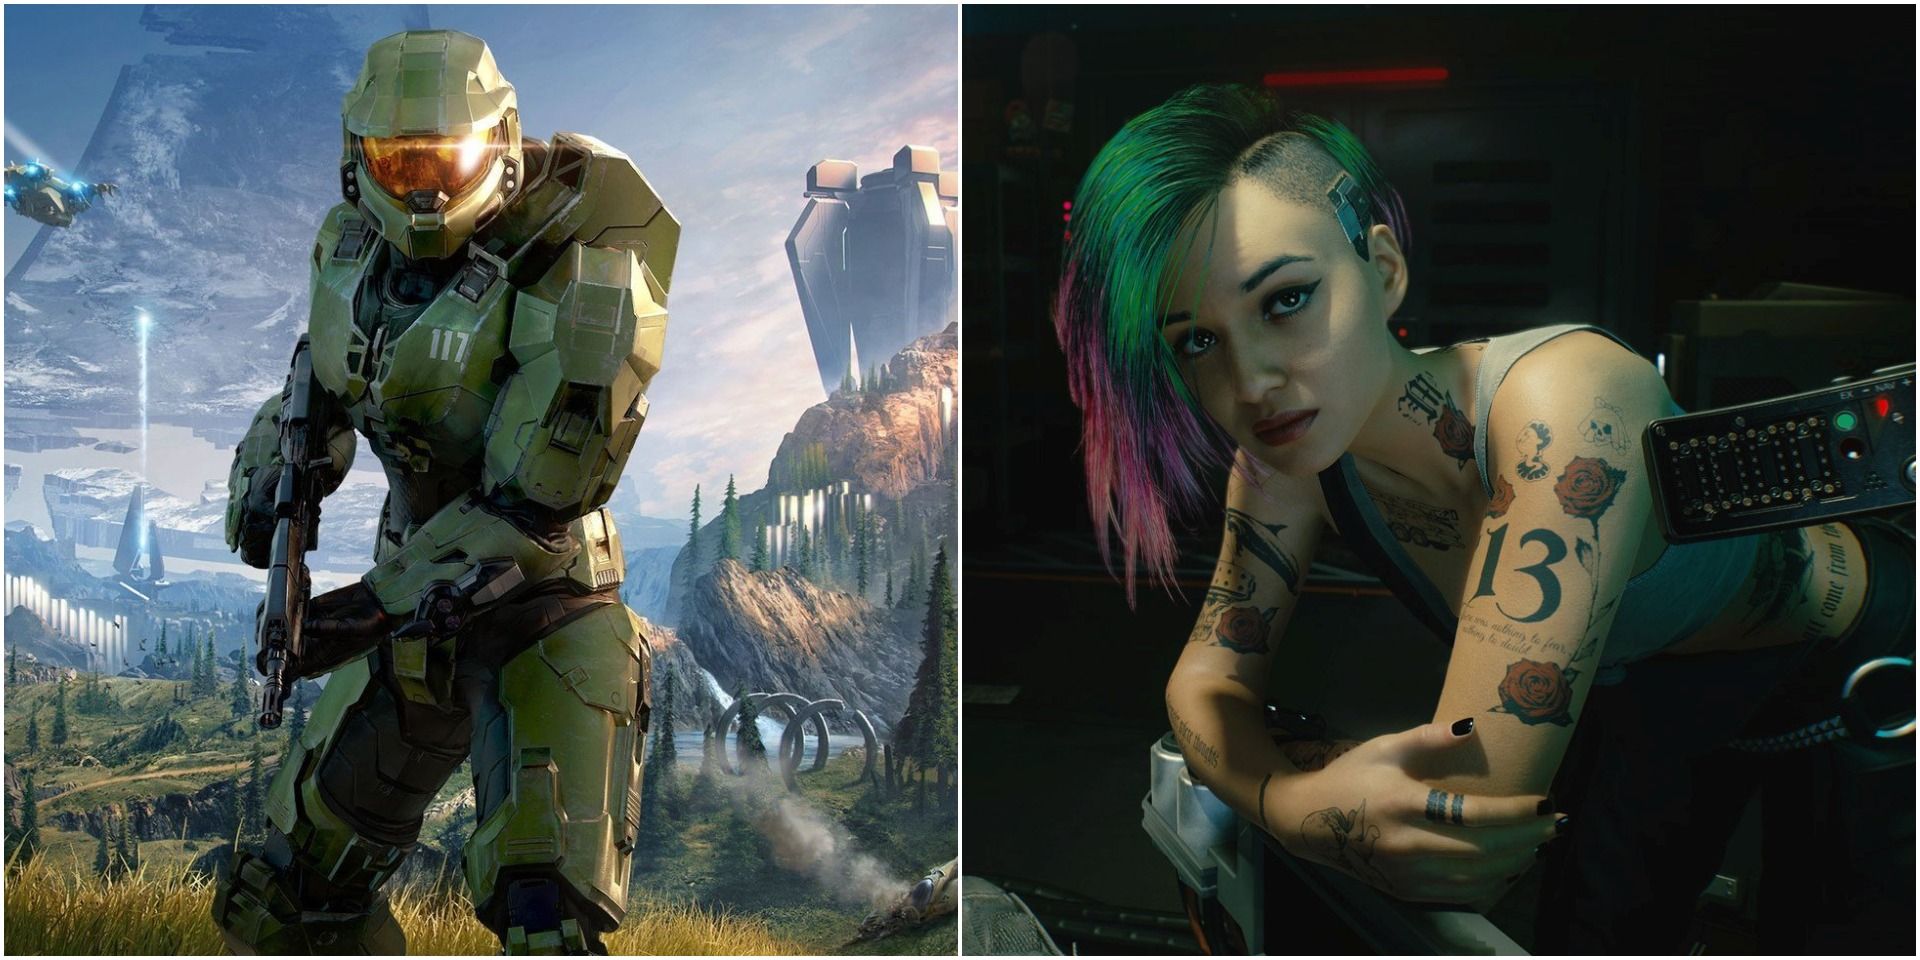 A collage showing Master Chief in Halo Infinite and Judy Alvarez in Cyberpunk 2077